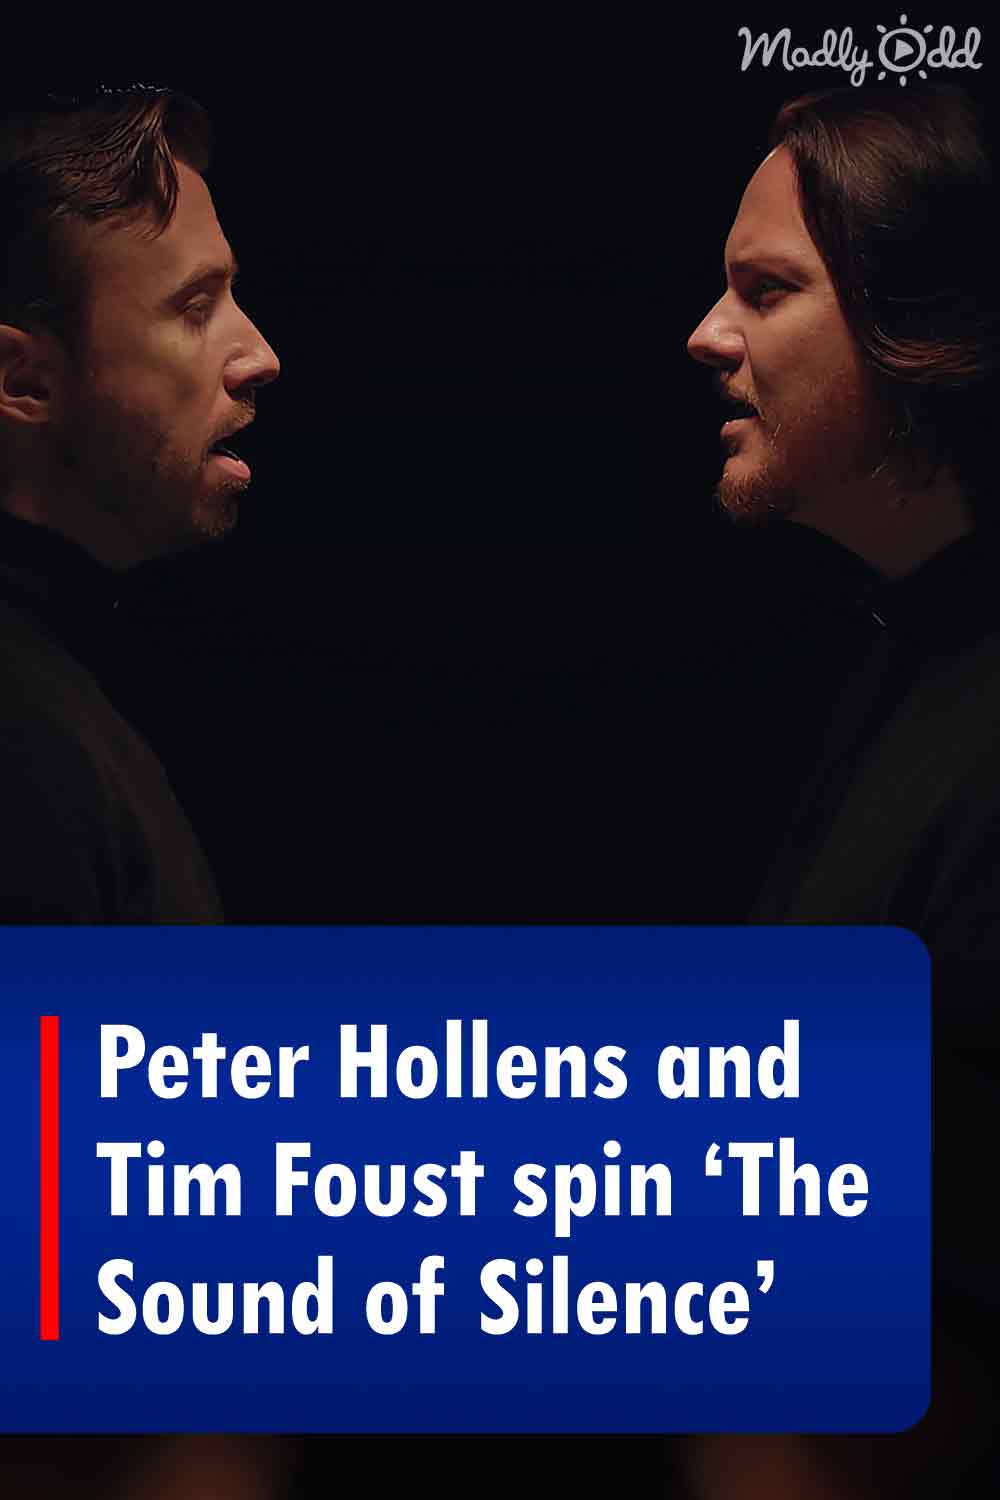 Peter Hollens and Tim Foust spin ‘The Sound of Silence’